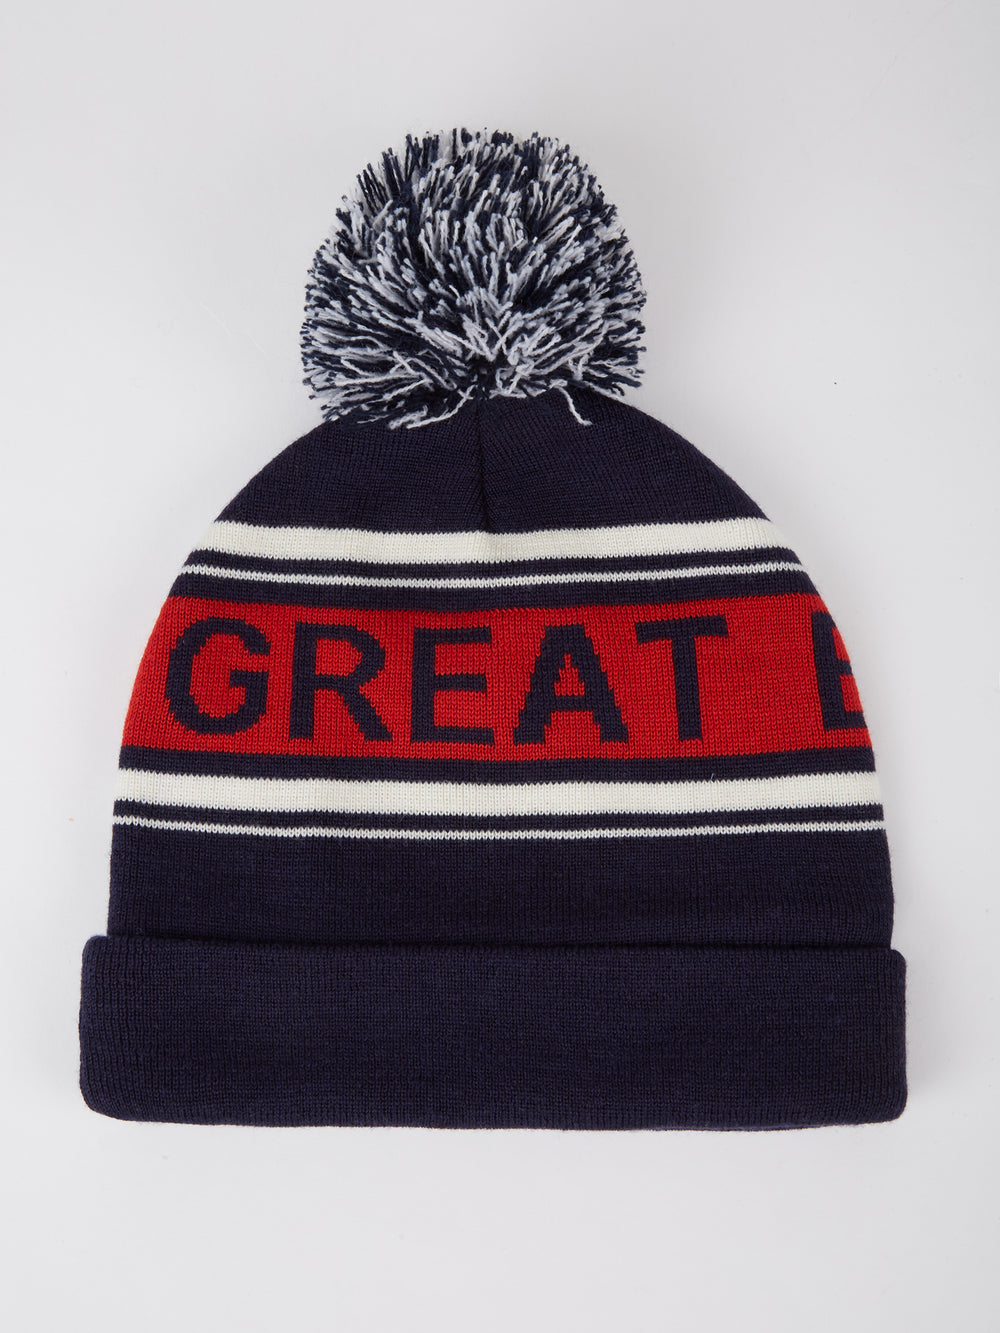 Team GB, Ben Sherman, Winter Beanie, Official 2022 Winter Olympics, Limited Edition Great Britain hat, Opening Ceremony Beijing, Navy, flat